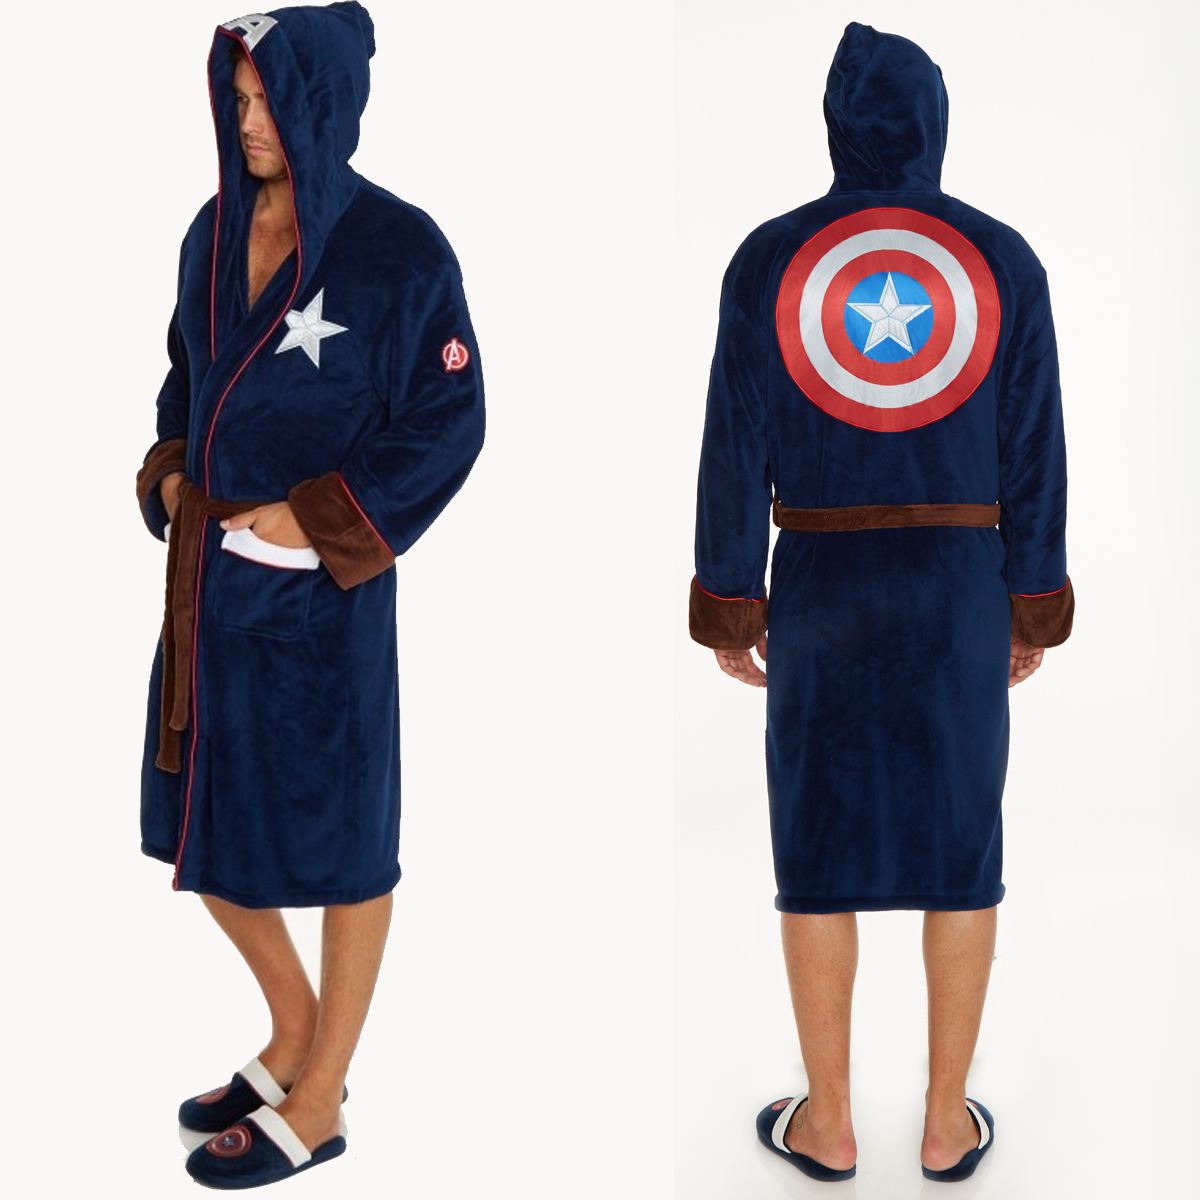 Captain America Gifts That Let You Bring His Shield Home